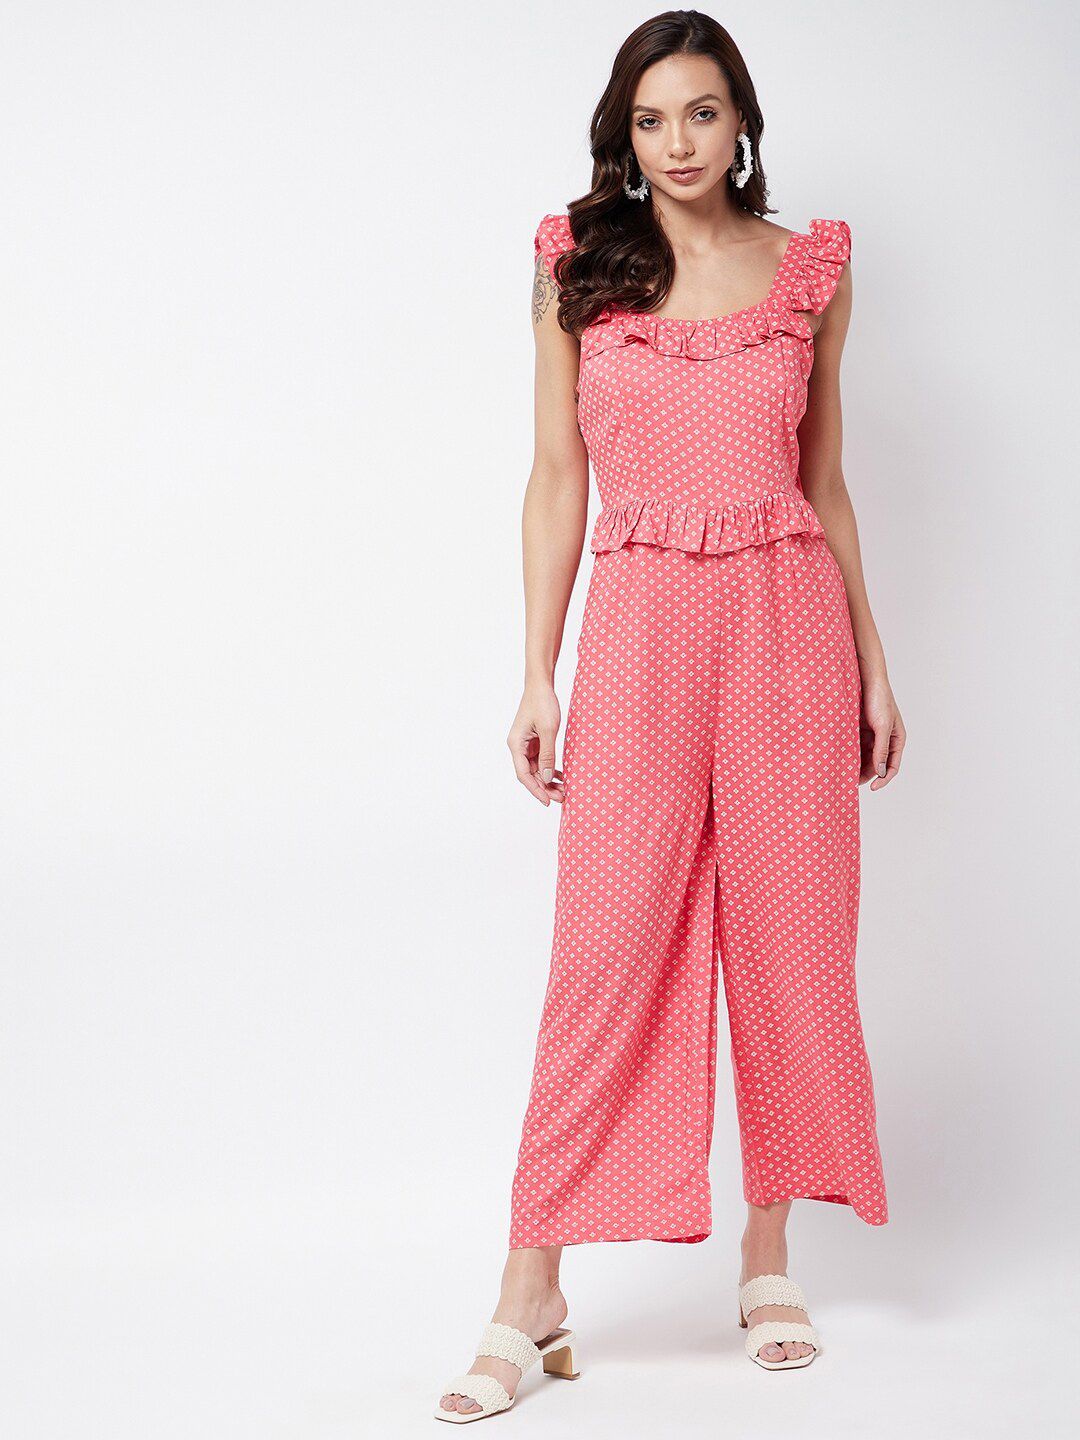 MAGRE Pink & Off White Printed Basic Jumpsuit with Ruffles Price in India